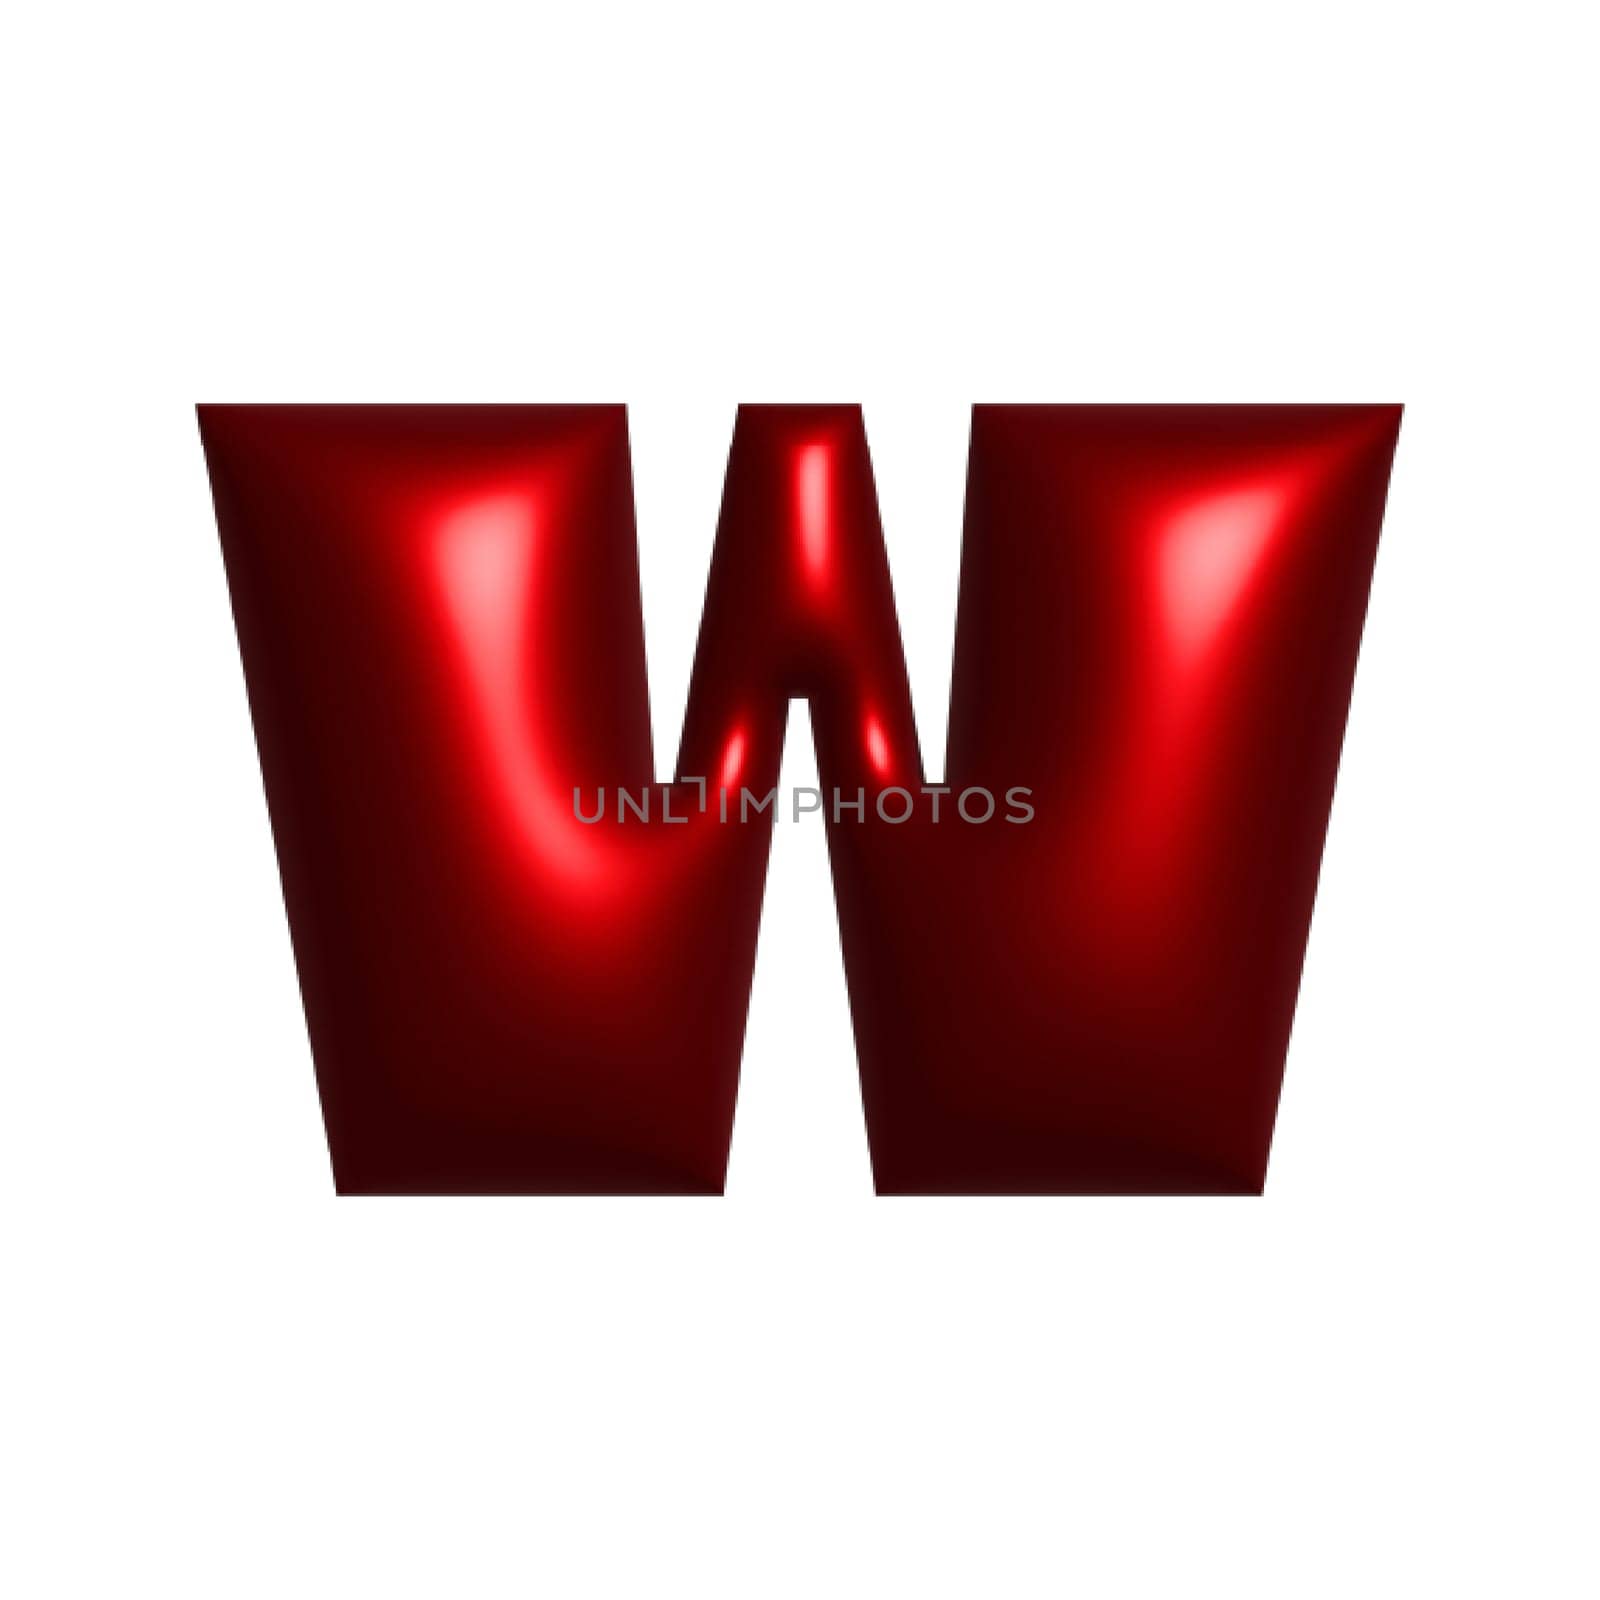 Red metal shiny reflective letter W 3D illustration by Dustick